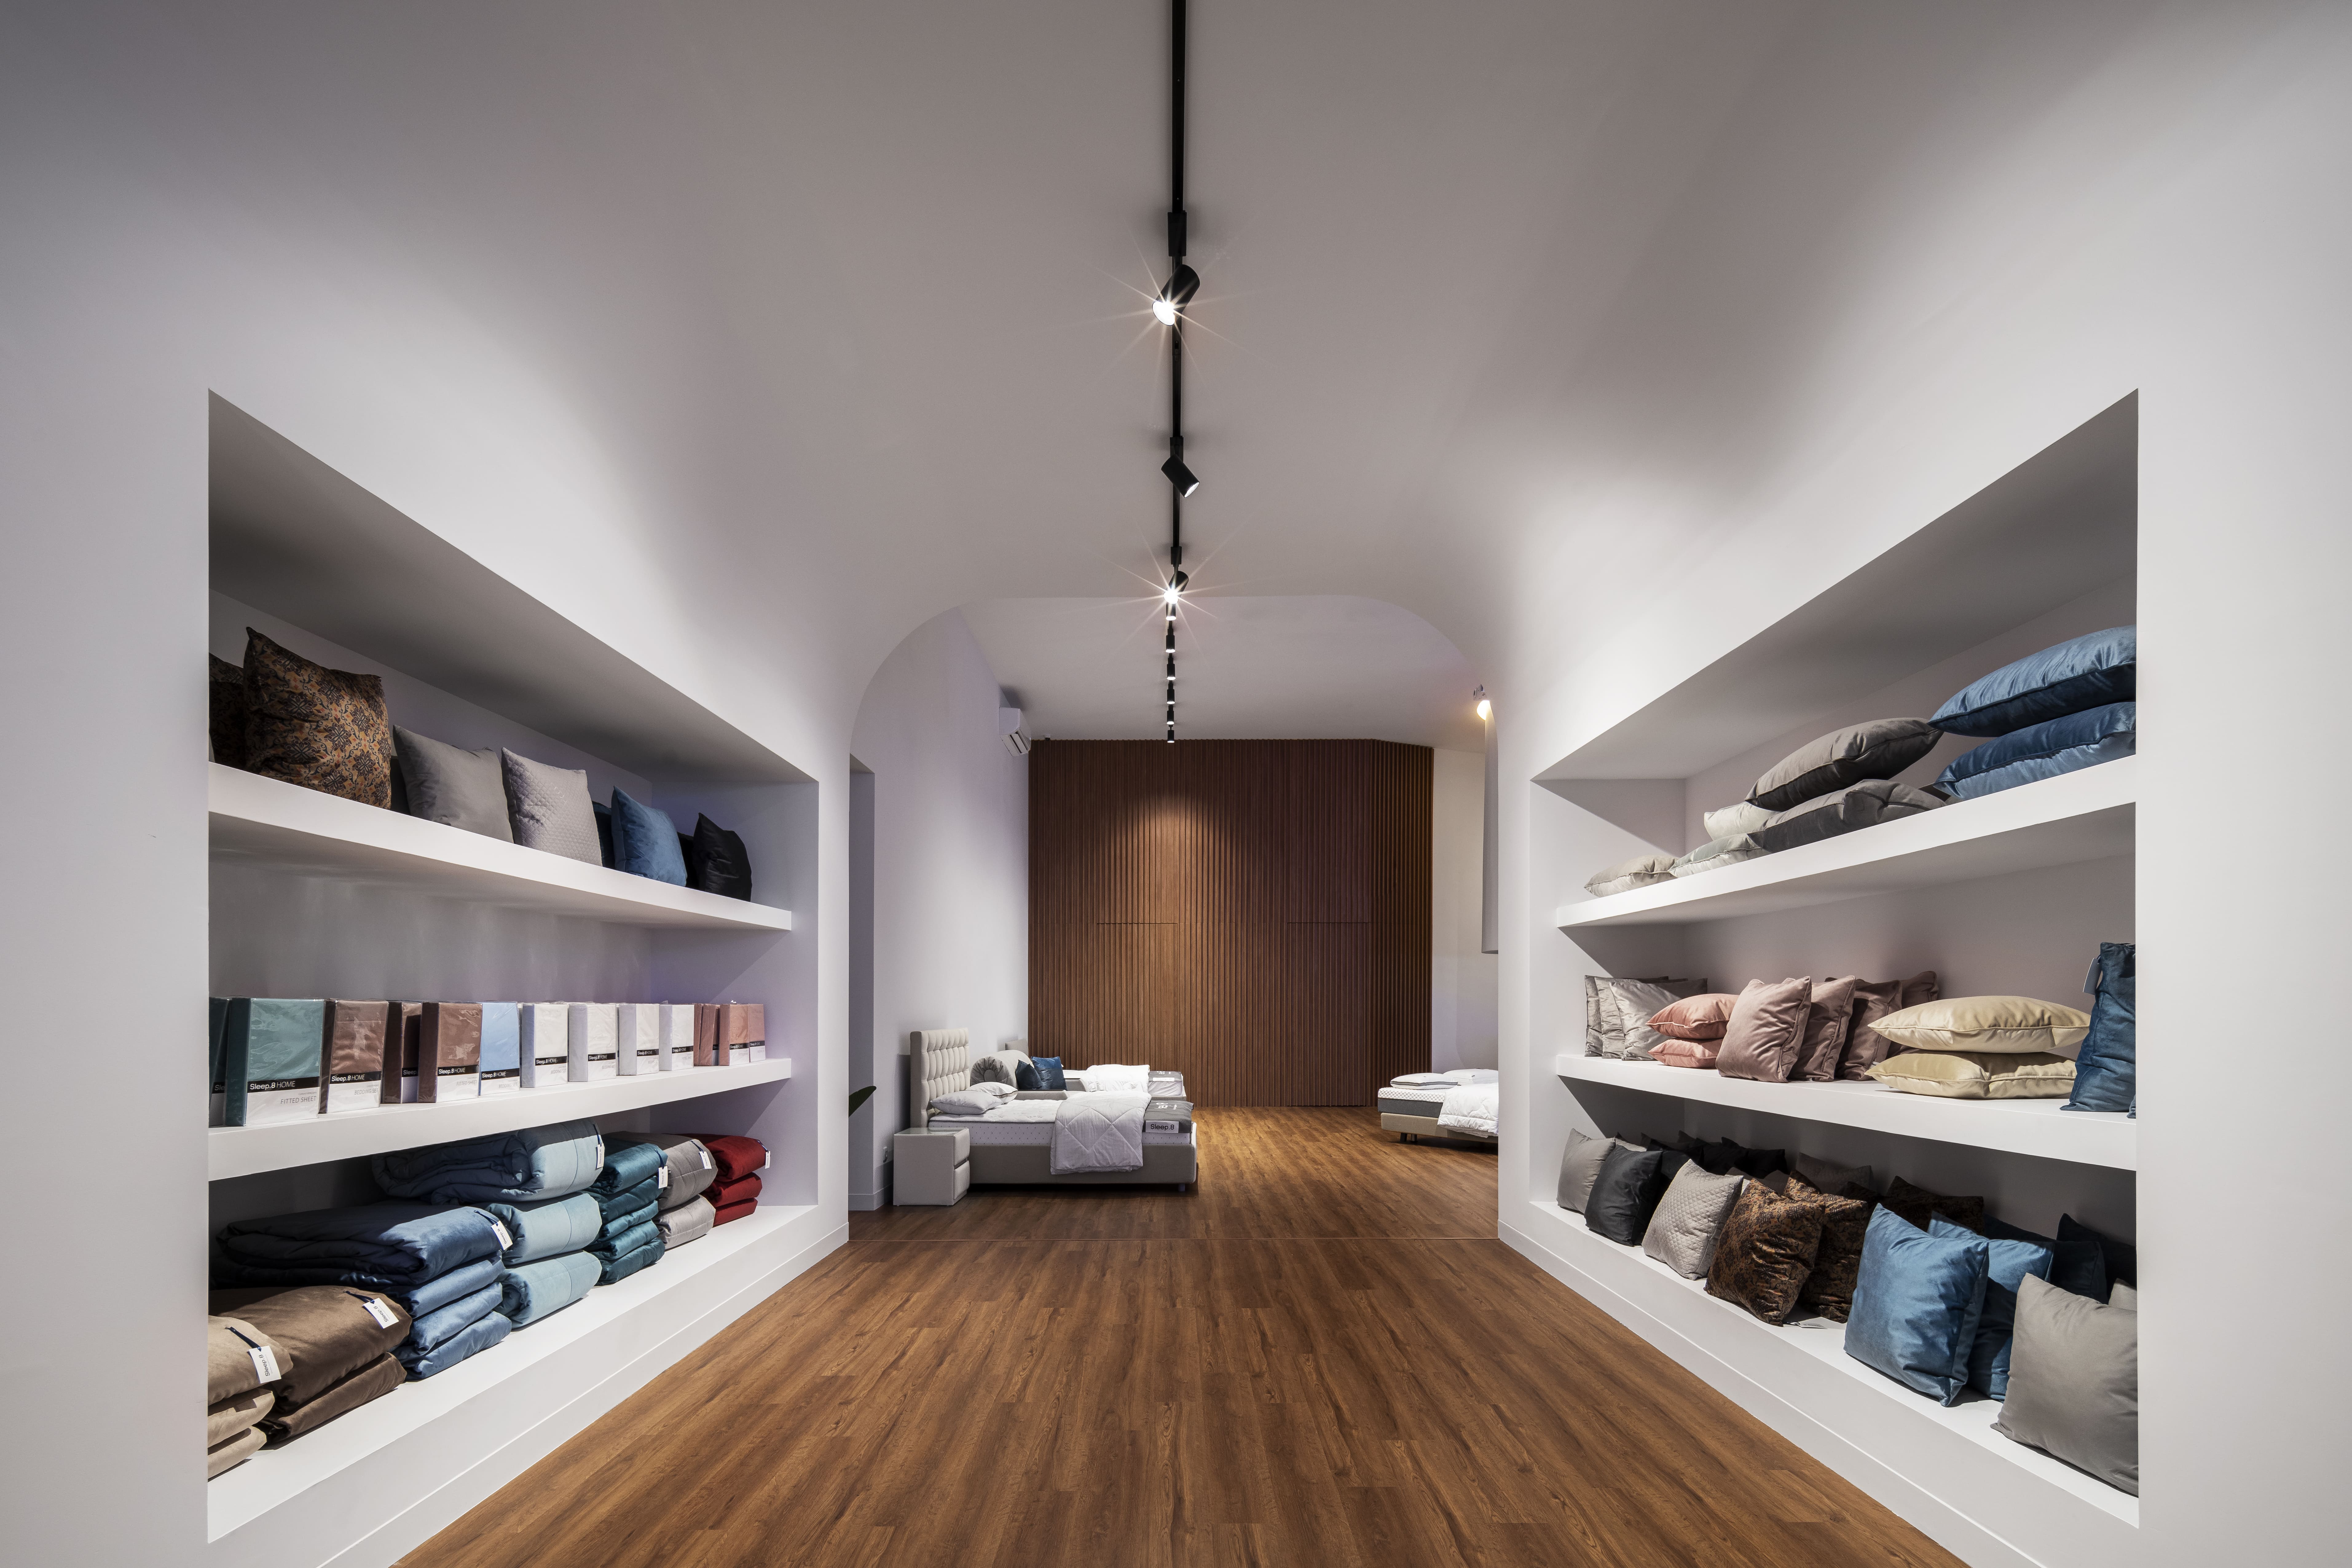 Sleep.8 opens its largest European store in Porto